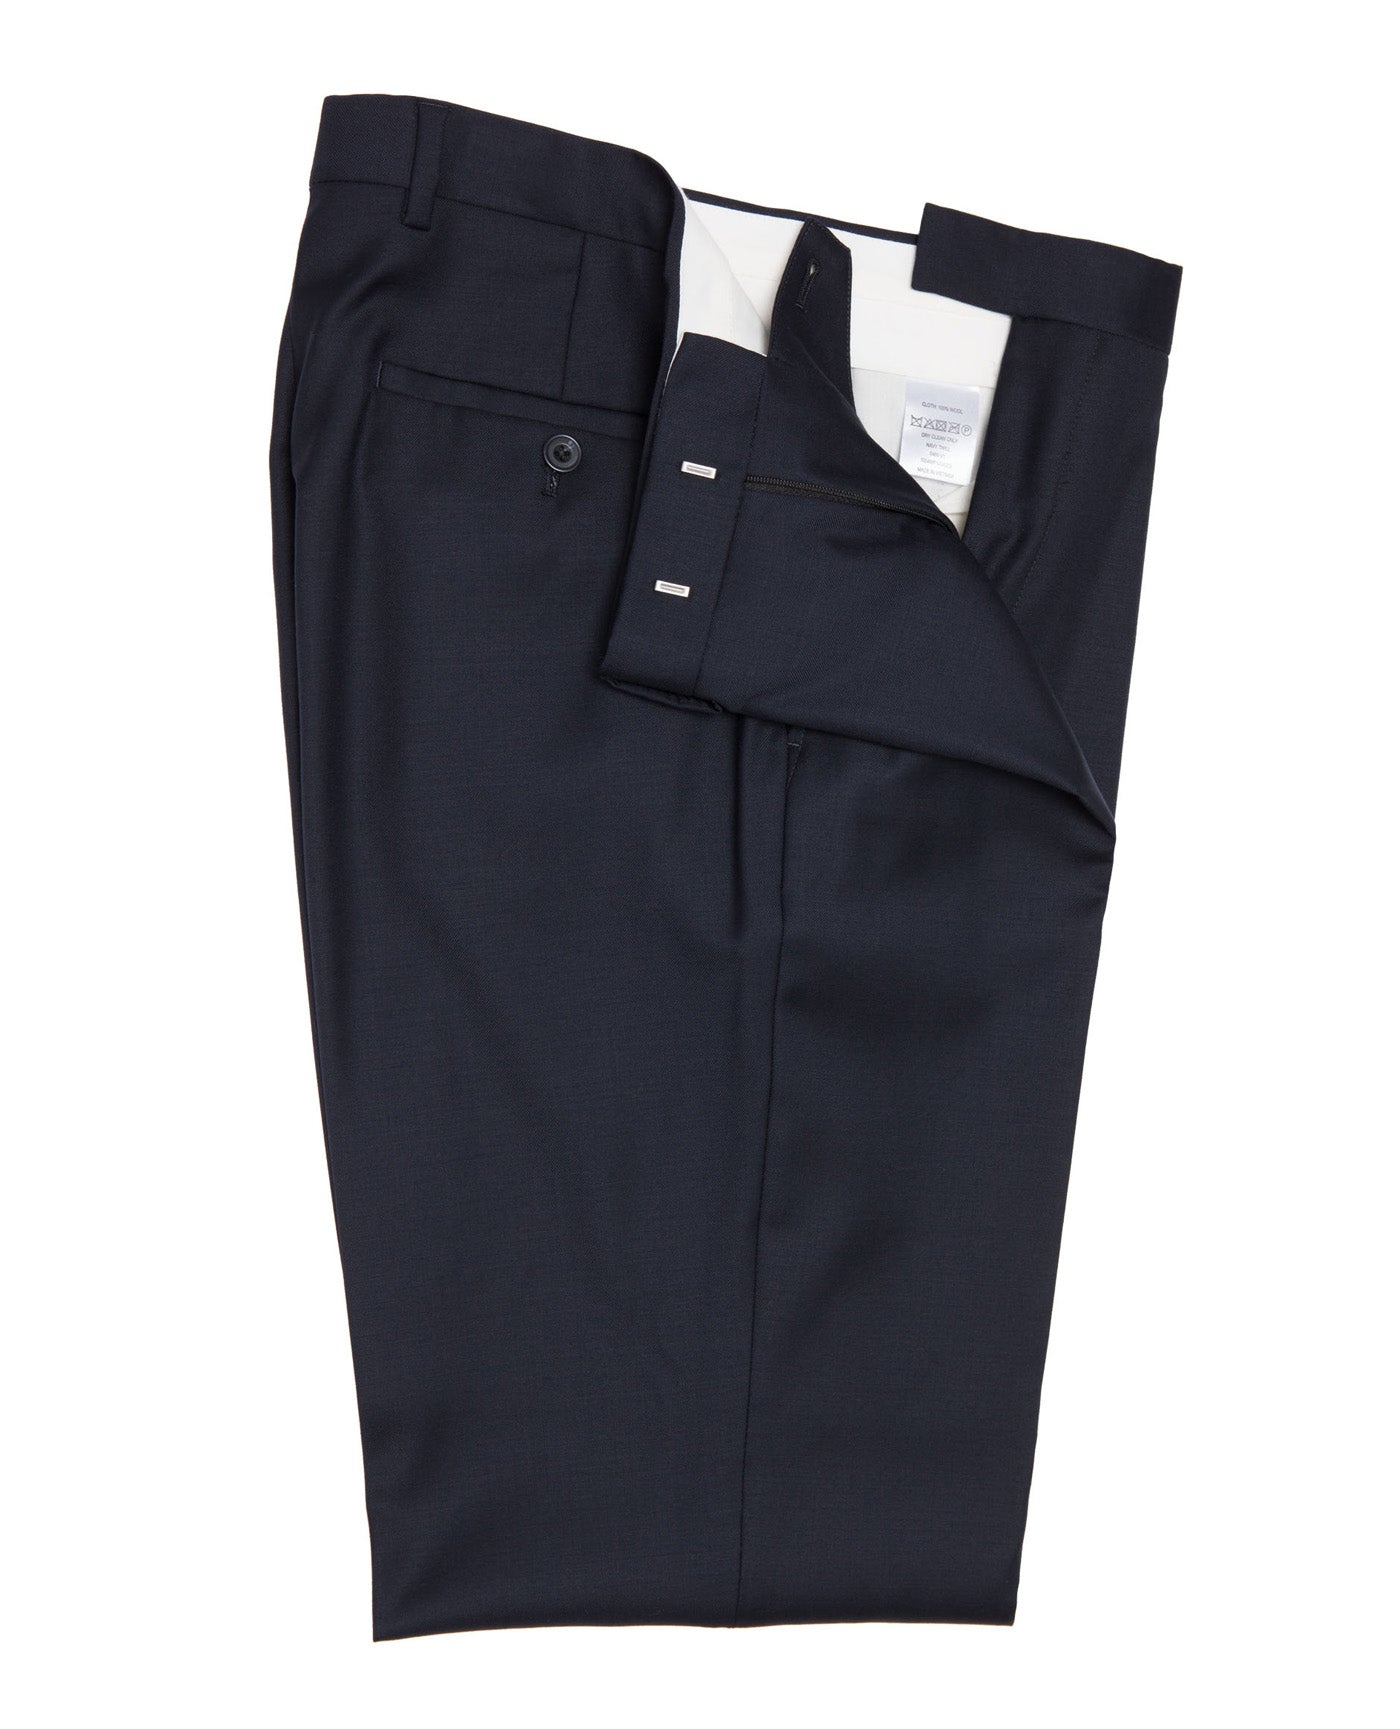 Image 1 of Flat Front Newbury Trousers Plain Twill Navy